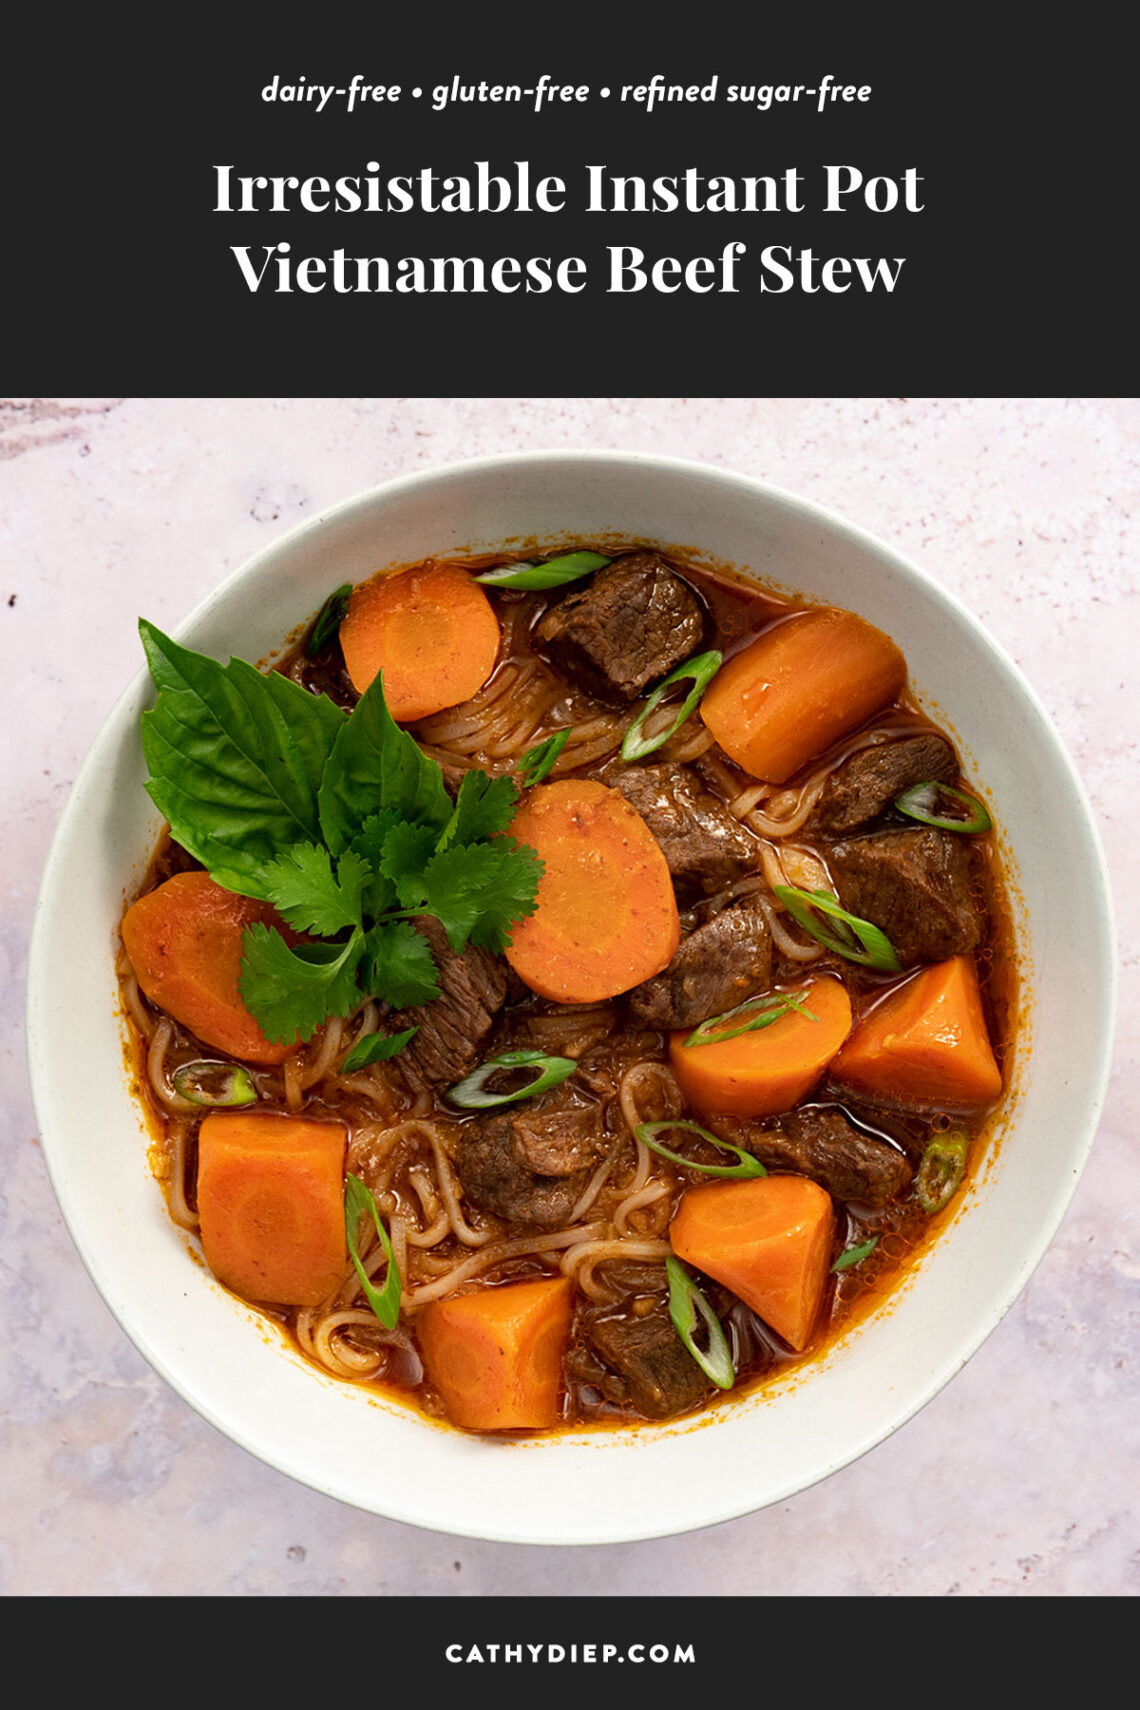 Irresistible Instant Pot Bo Kho Recipe (Vietnamese Beef Stew) - By Cathy